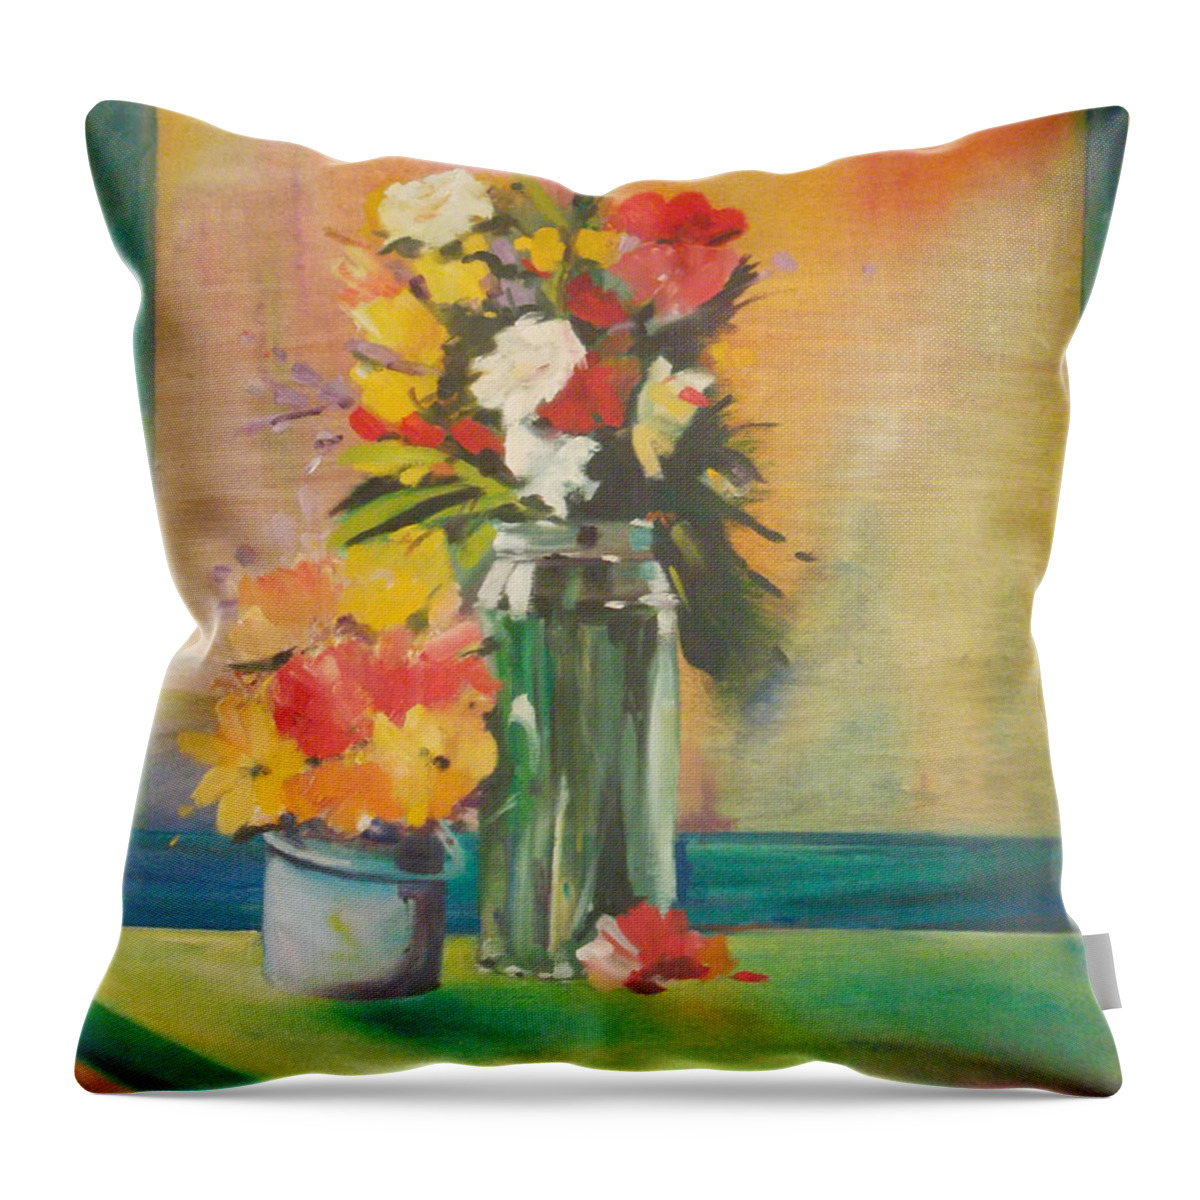 Flowers Throw Pillow featuring the painting Fresh Picked Bouquet by Susan Esbensen